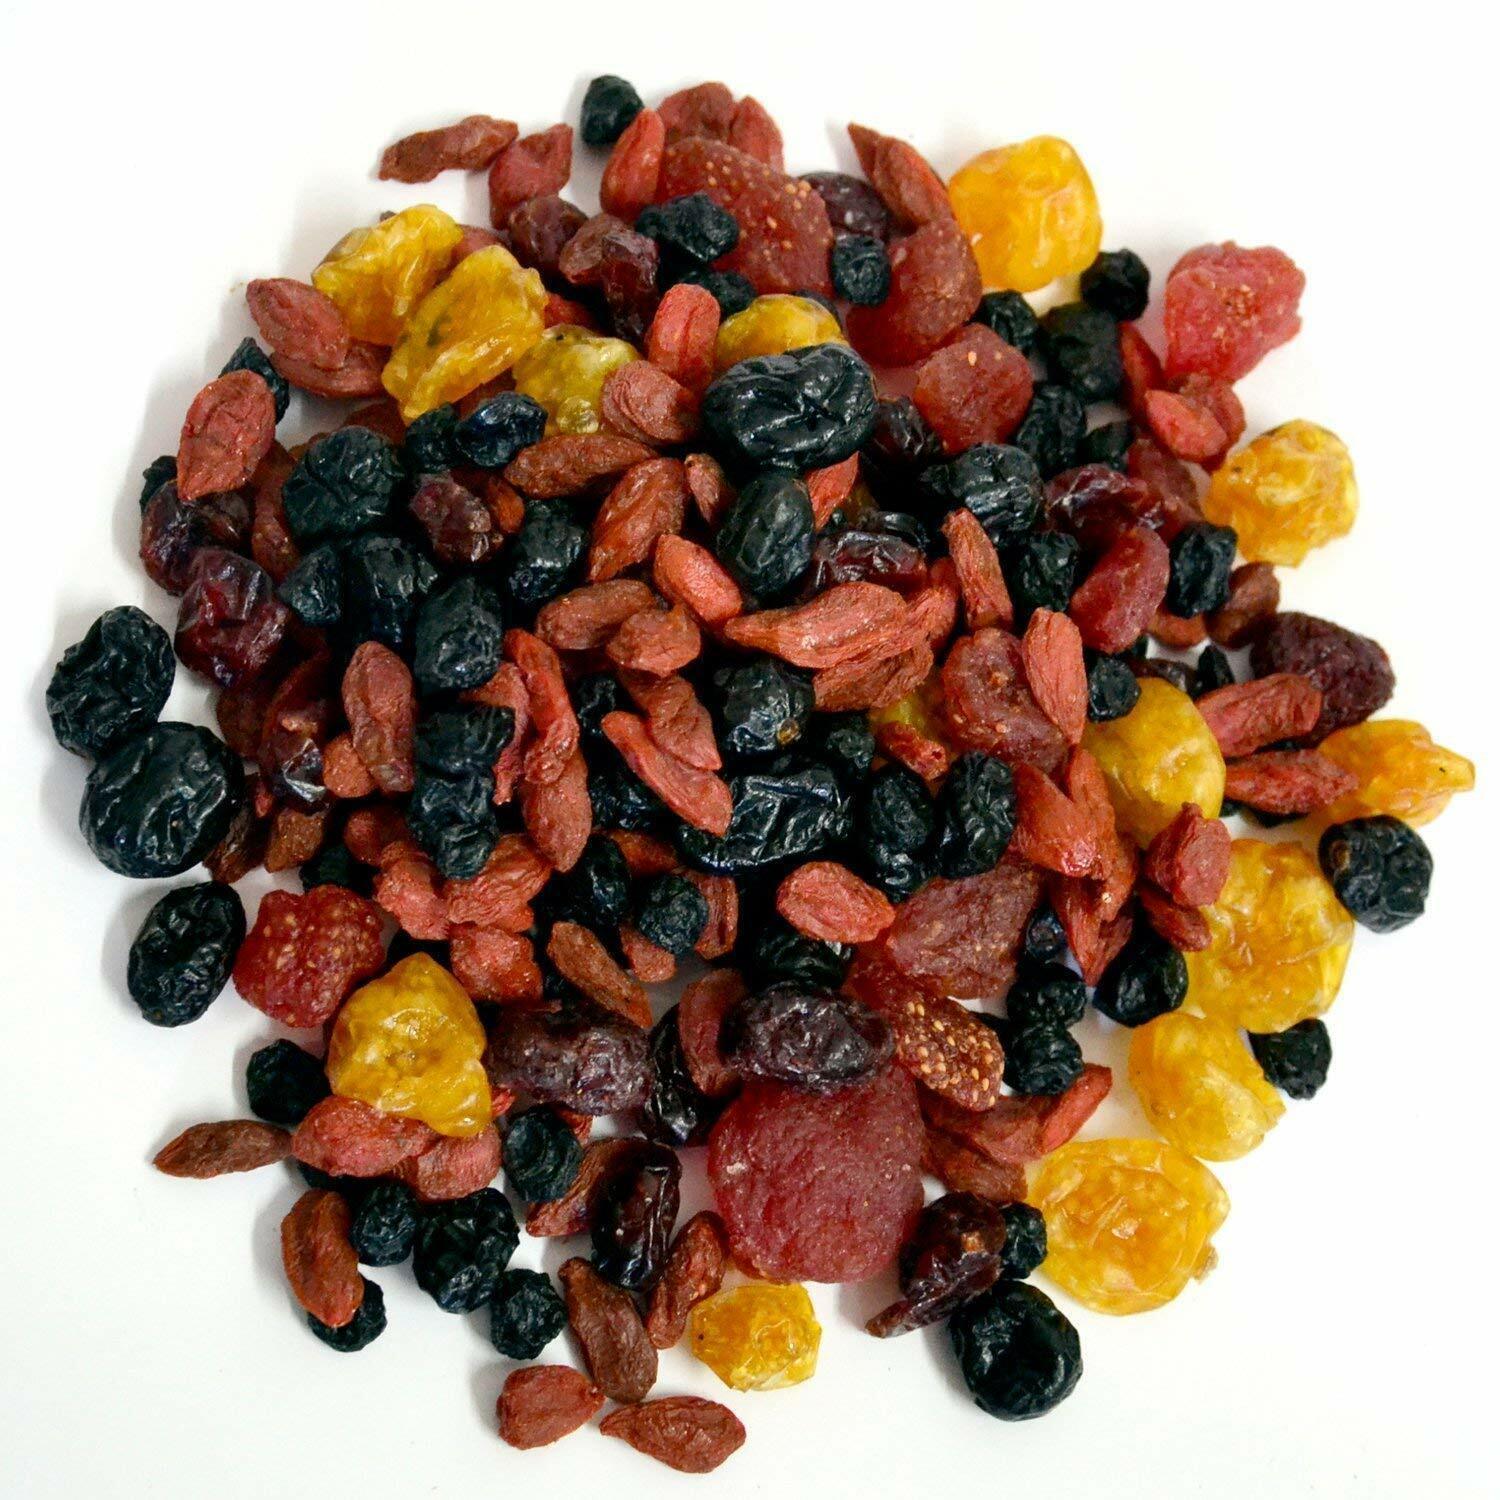 Primary image for Fresh Dried Blueberry, Cranberry, Strawberry, Cherry, Gojiberry Mix (50Gm each)